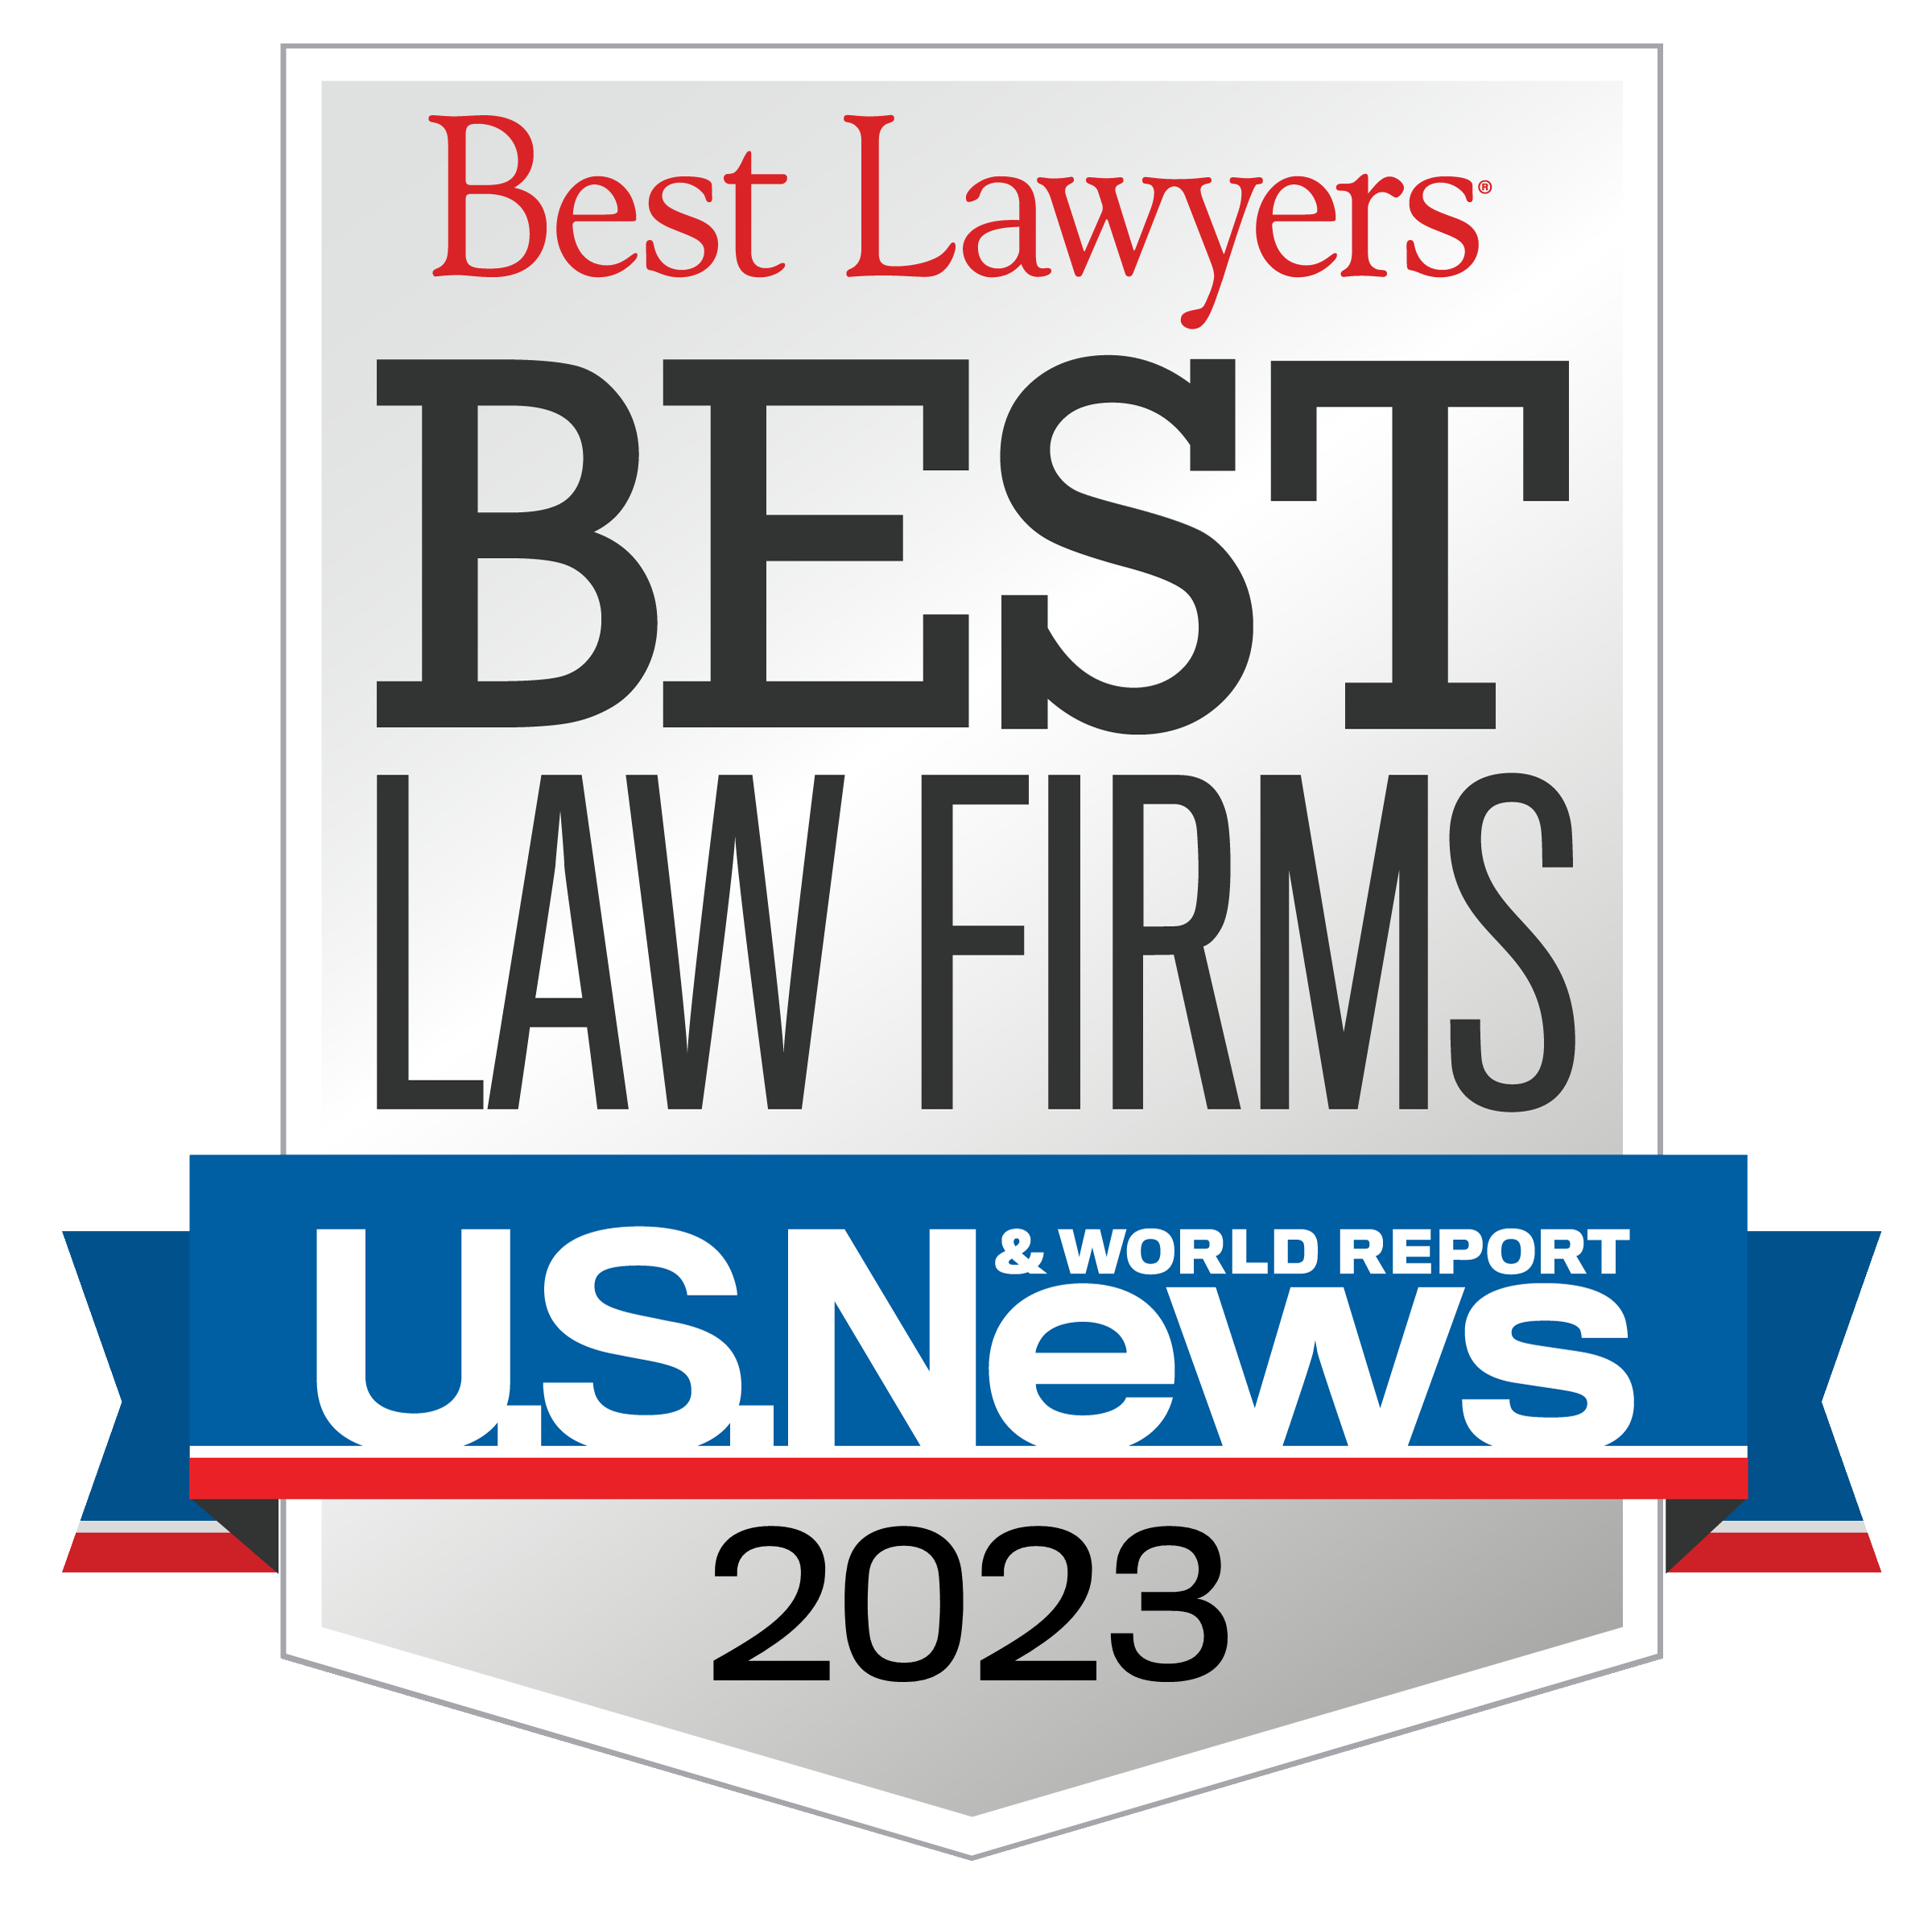 Best Personal injury Law Firms 2023 Badge